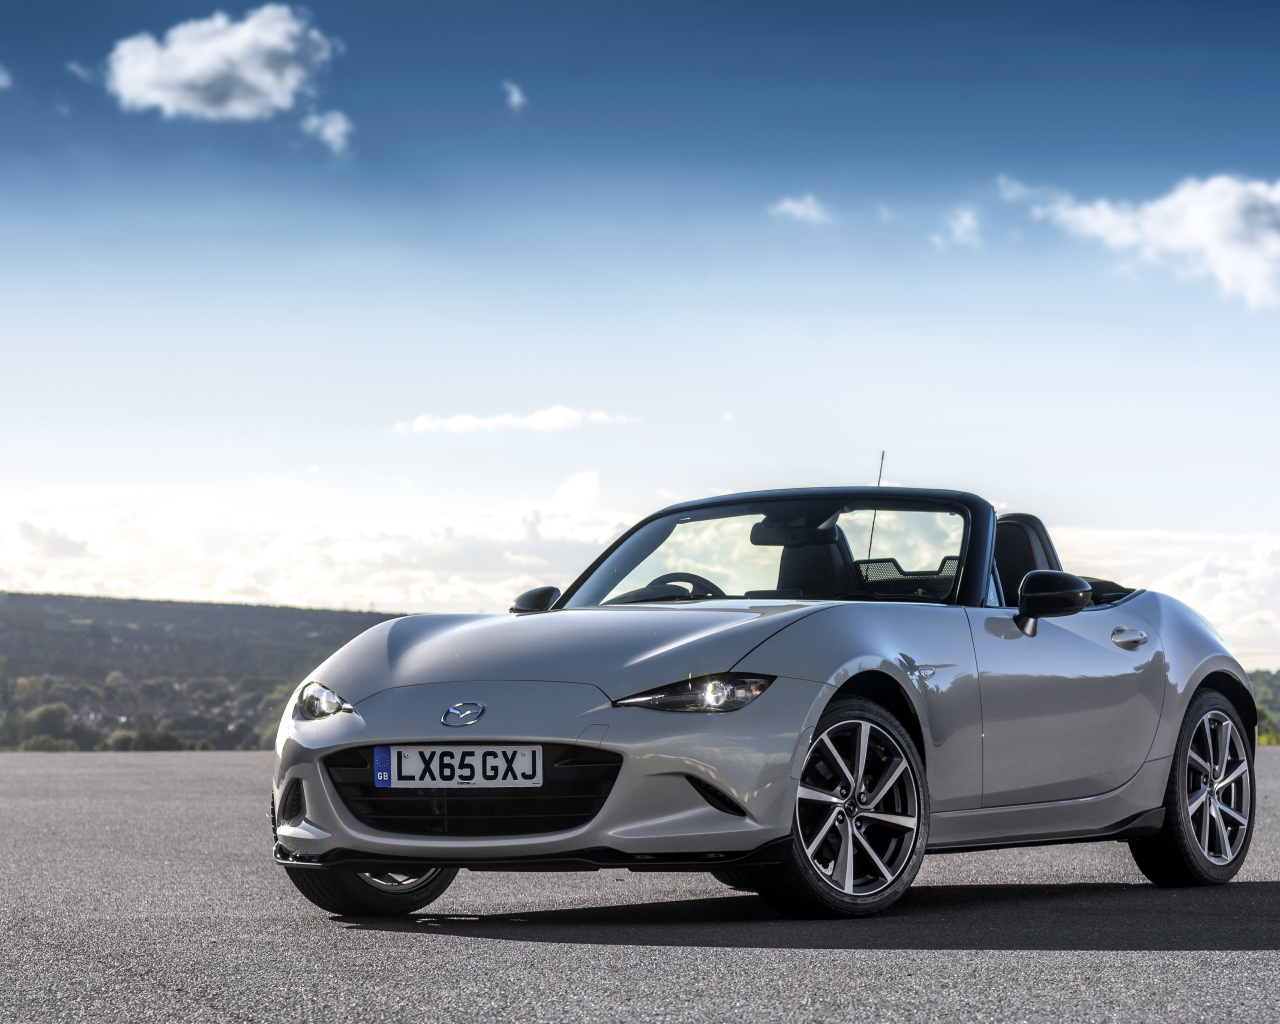 Mazda MX-5 silver cabriolet on the background of a beautiful sky